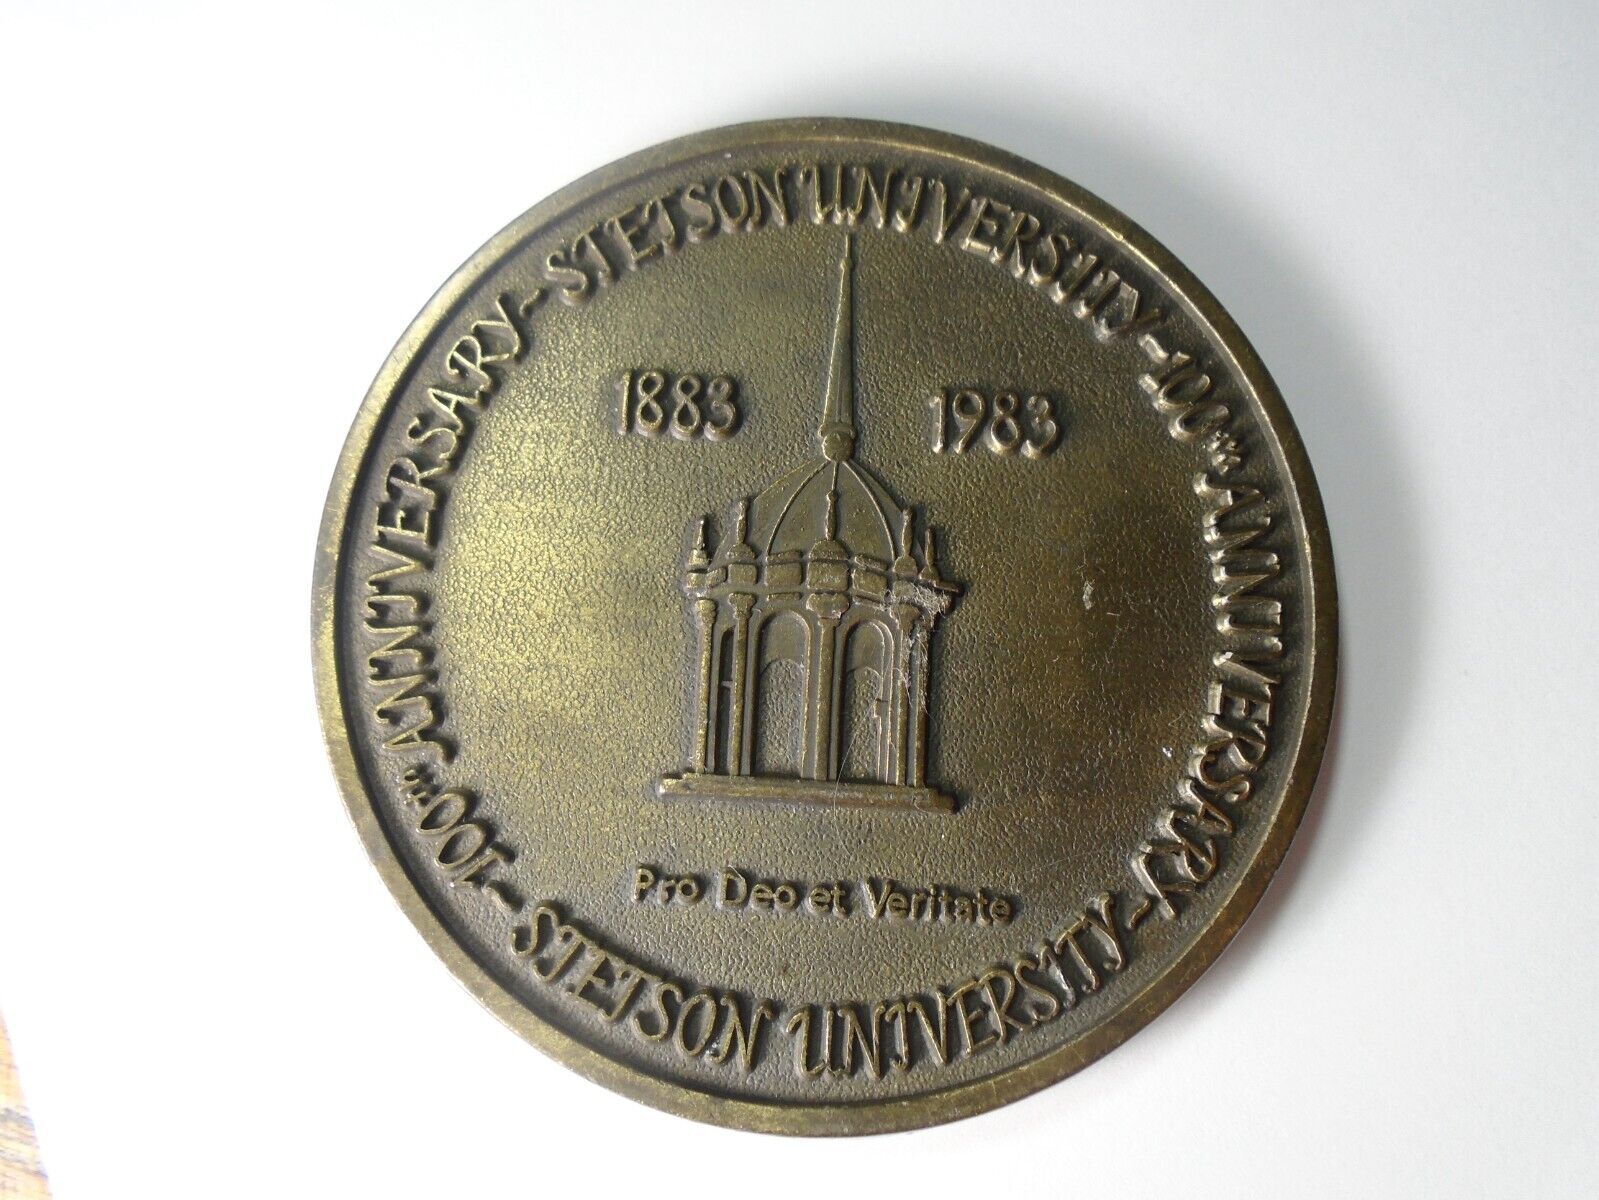 RARE Stetson University Bronze Medallion 1883-1983 for God and truth Collectible